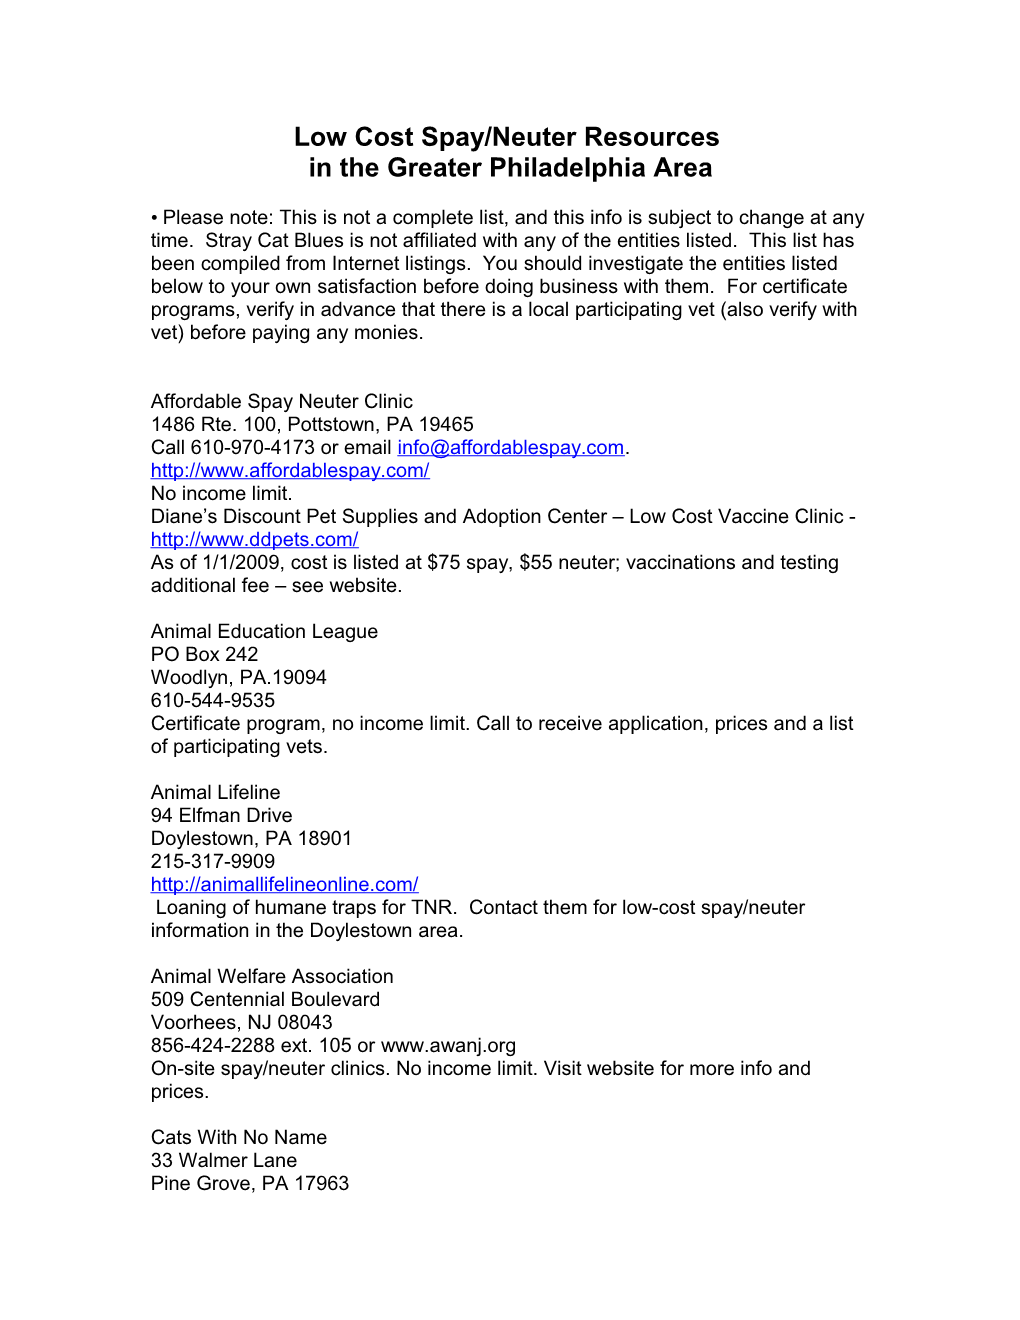 Low Cost Spay/Neuter Resources in the Greater Philadelphia Area